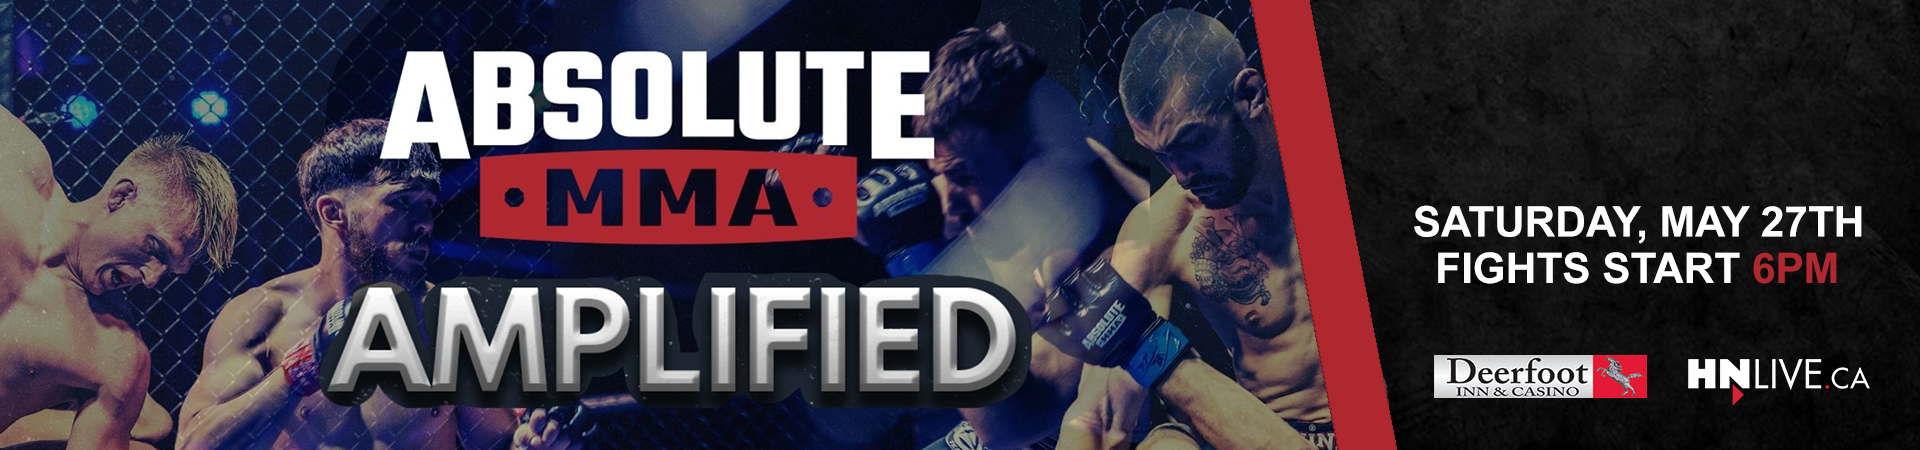 Absolute MMA Amplified